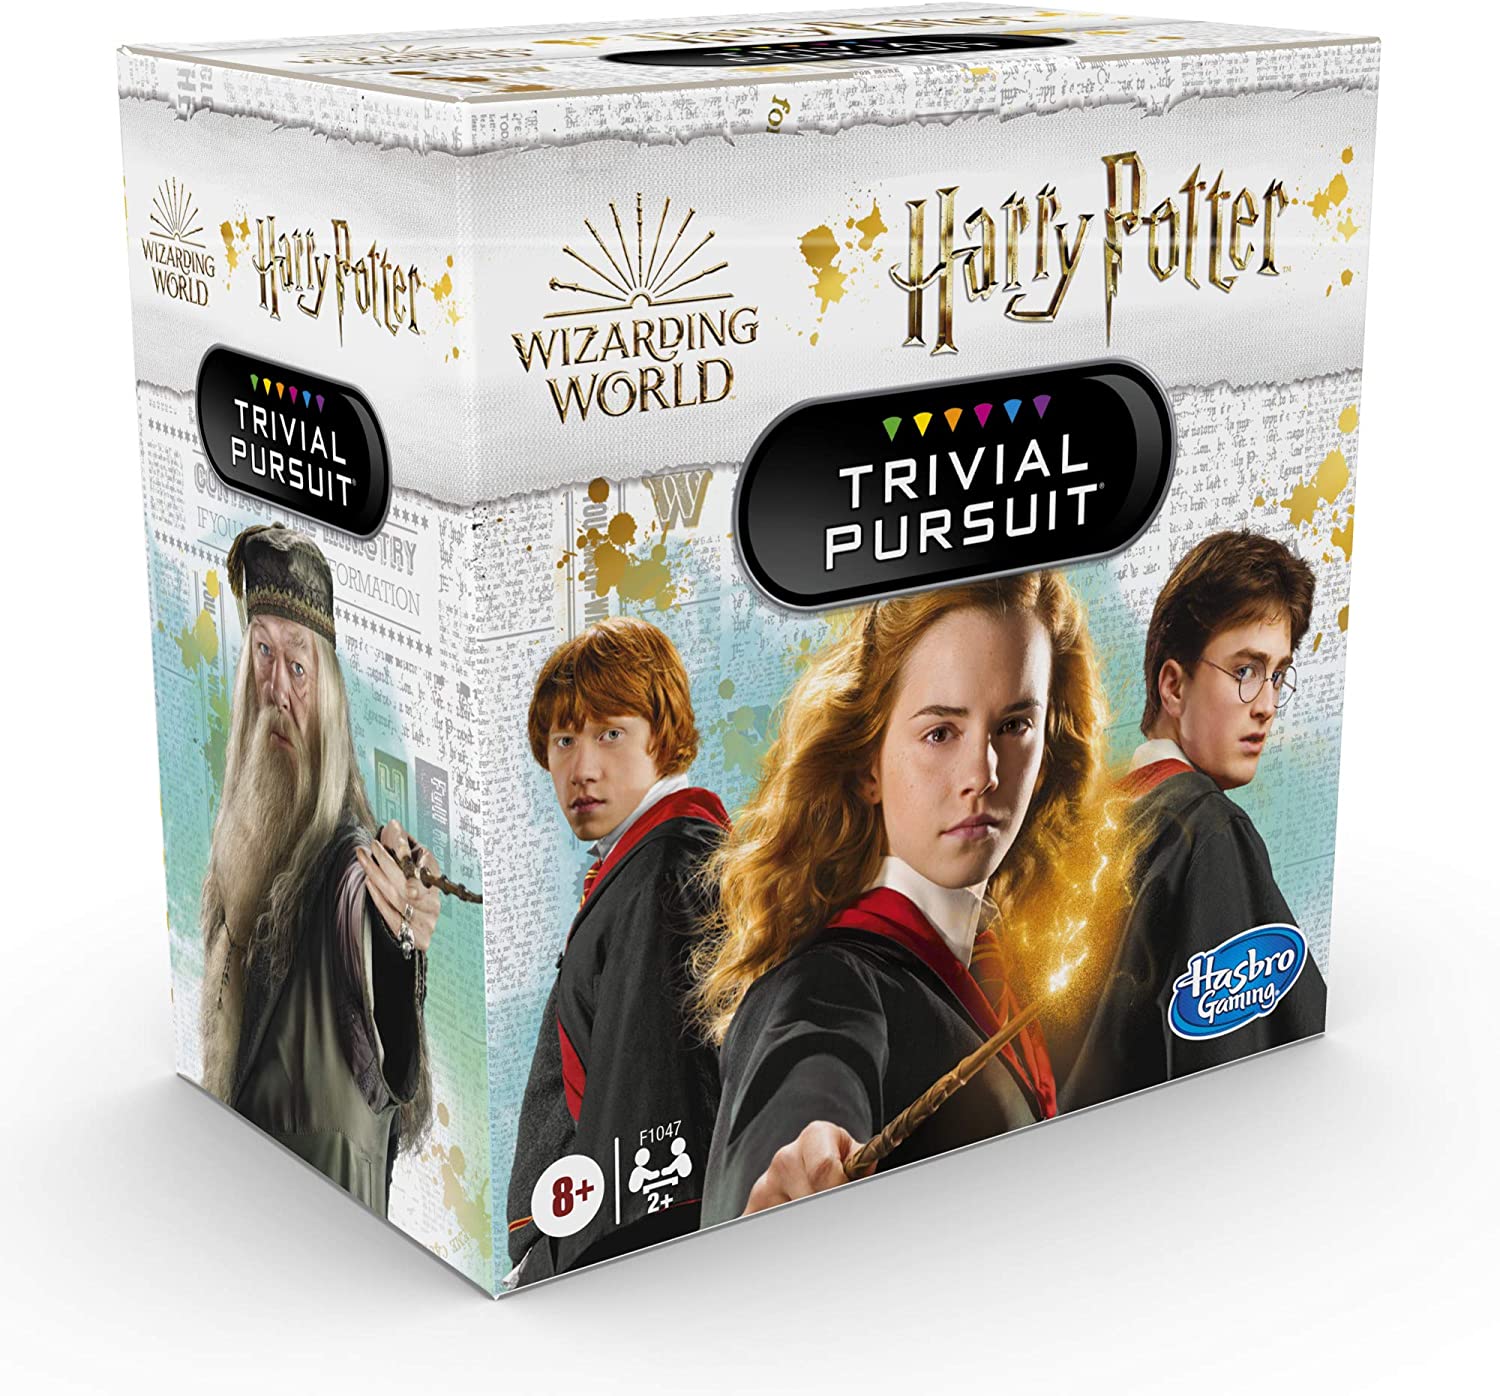 Hasbro Gaming Trivial Pursuit Wizarding World Harry Potter Edition Compact Trivia Game For 2 Or More Players 600 Trivia Questions Ages 8 And Up Lazada Singapore